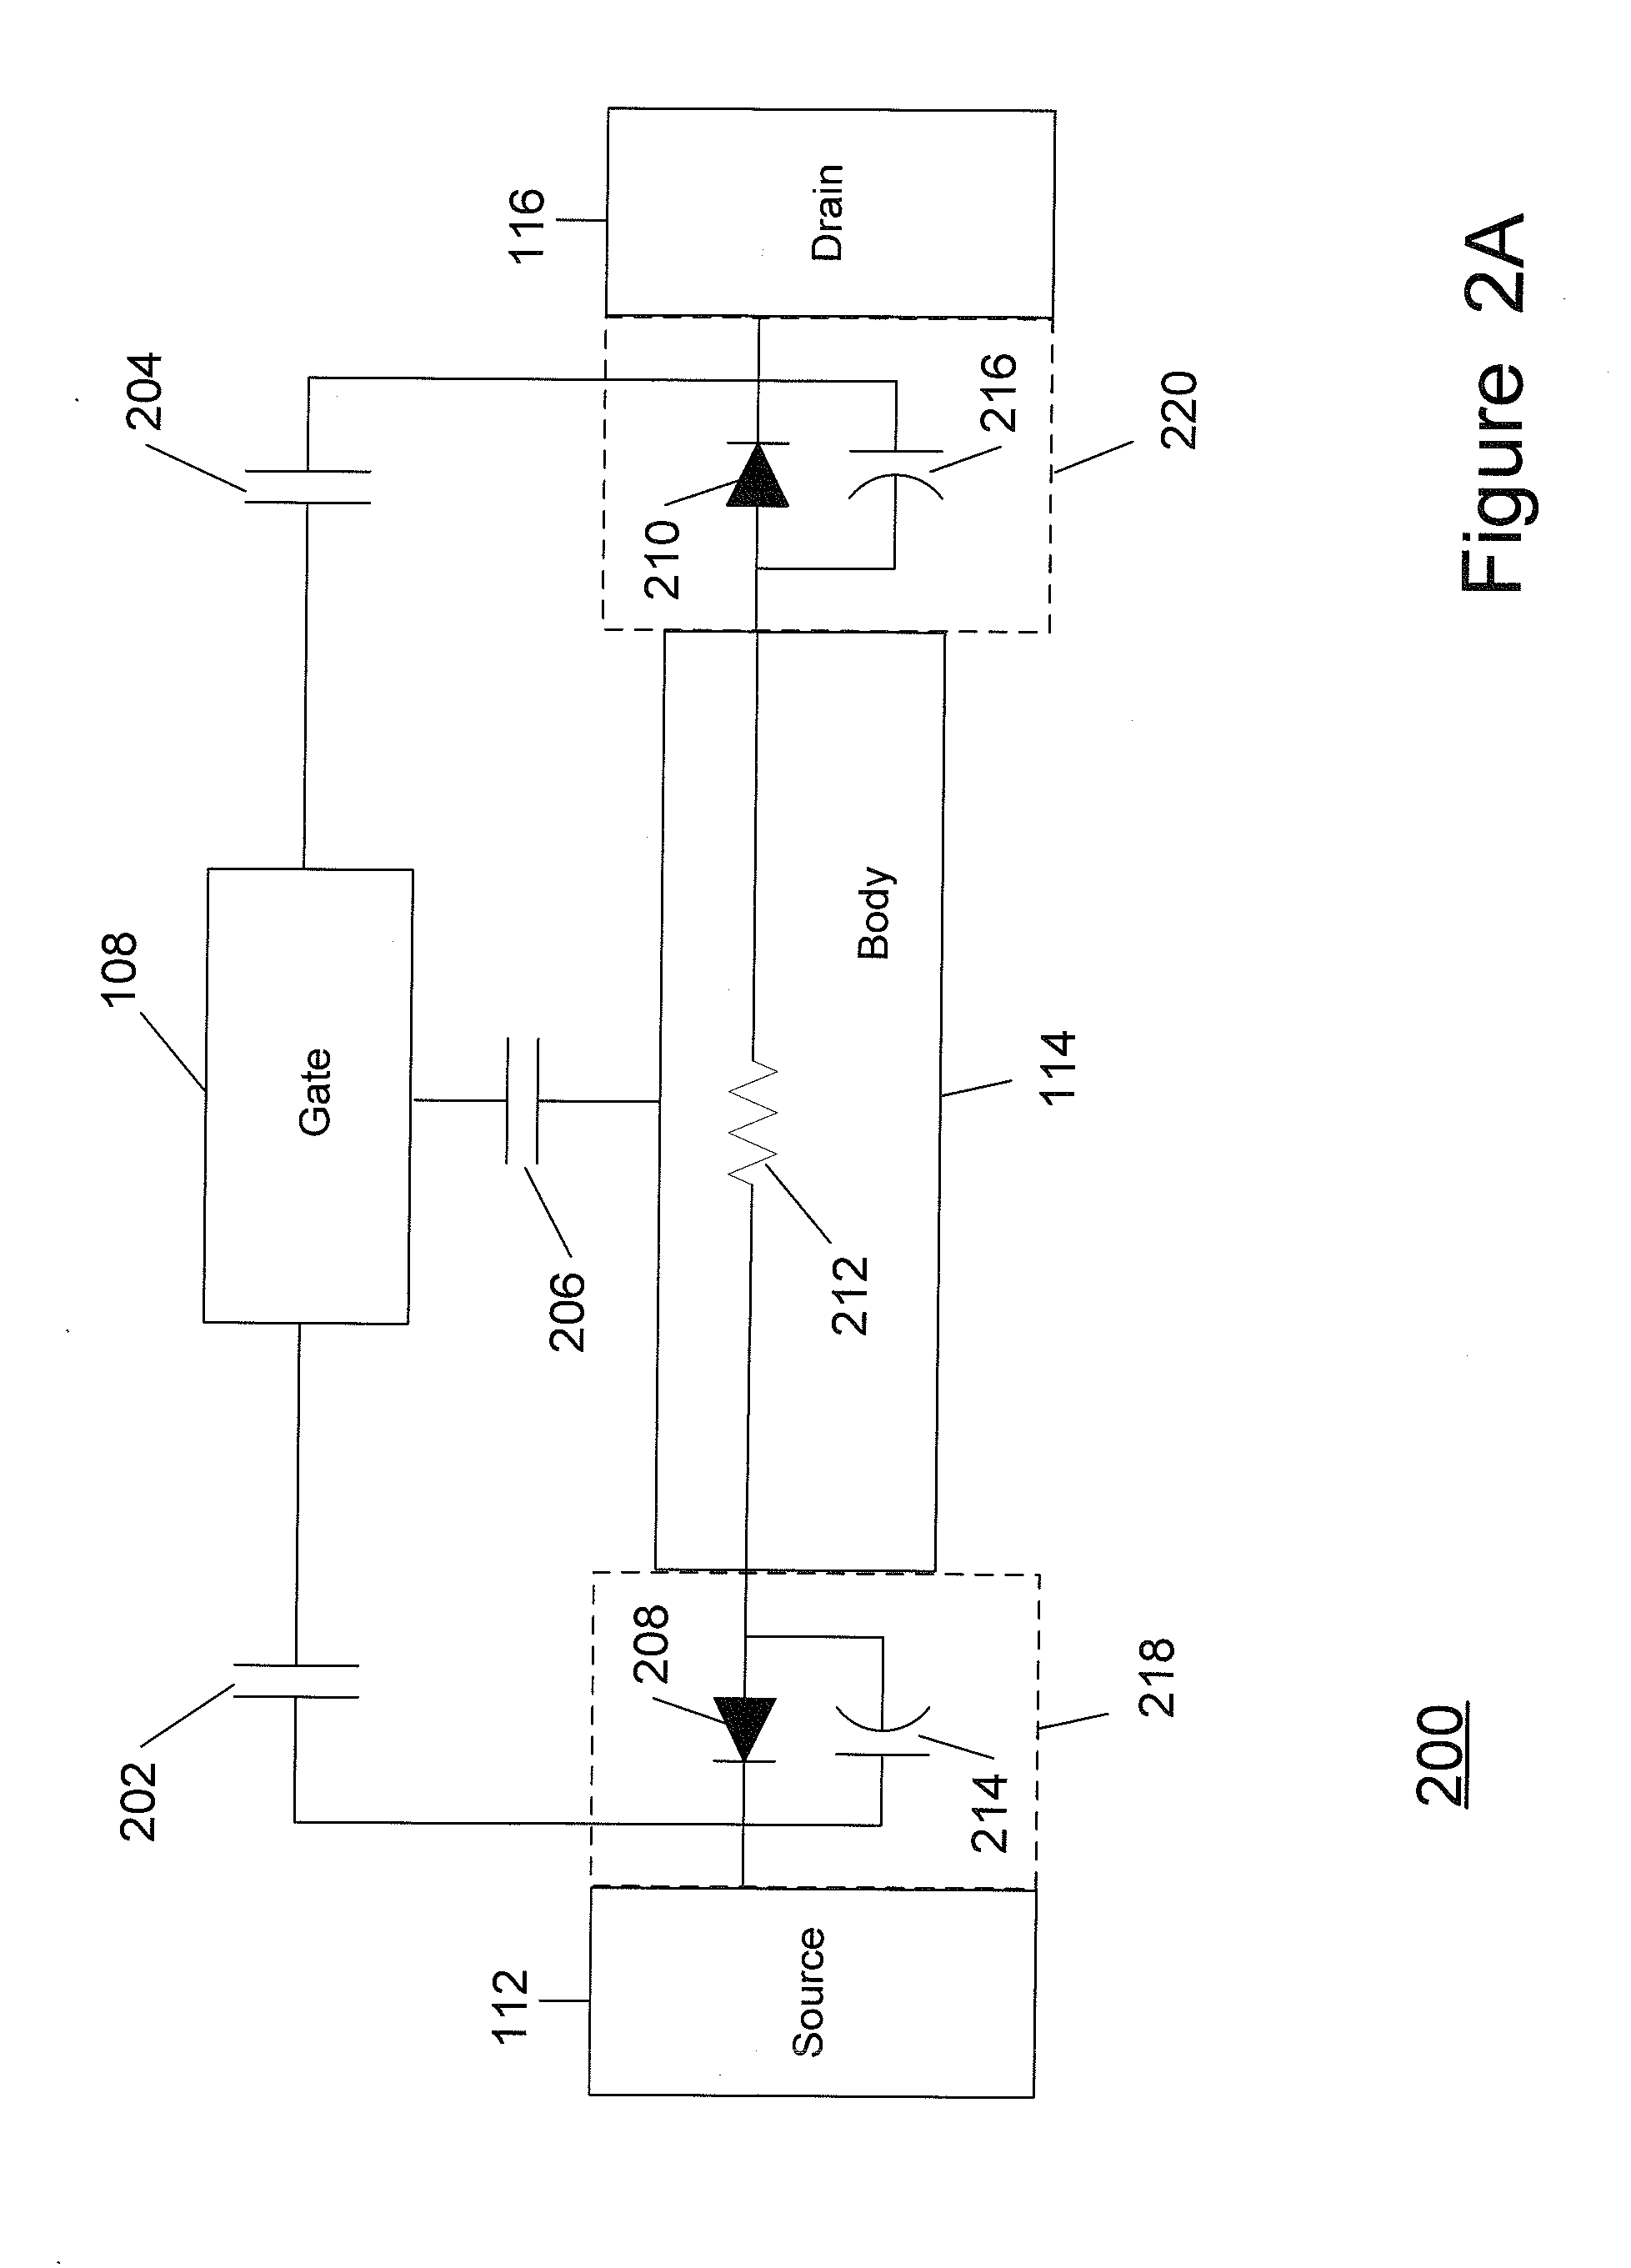 Method and Apparatus for Use in Improving Linearity of MOSFETs Using an Accumulated Charge Sink